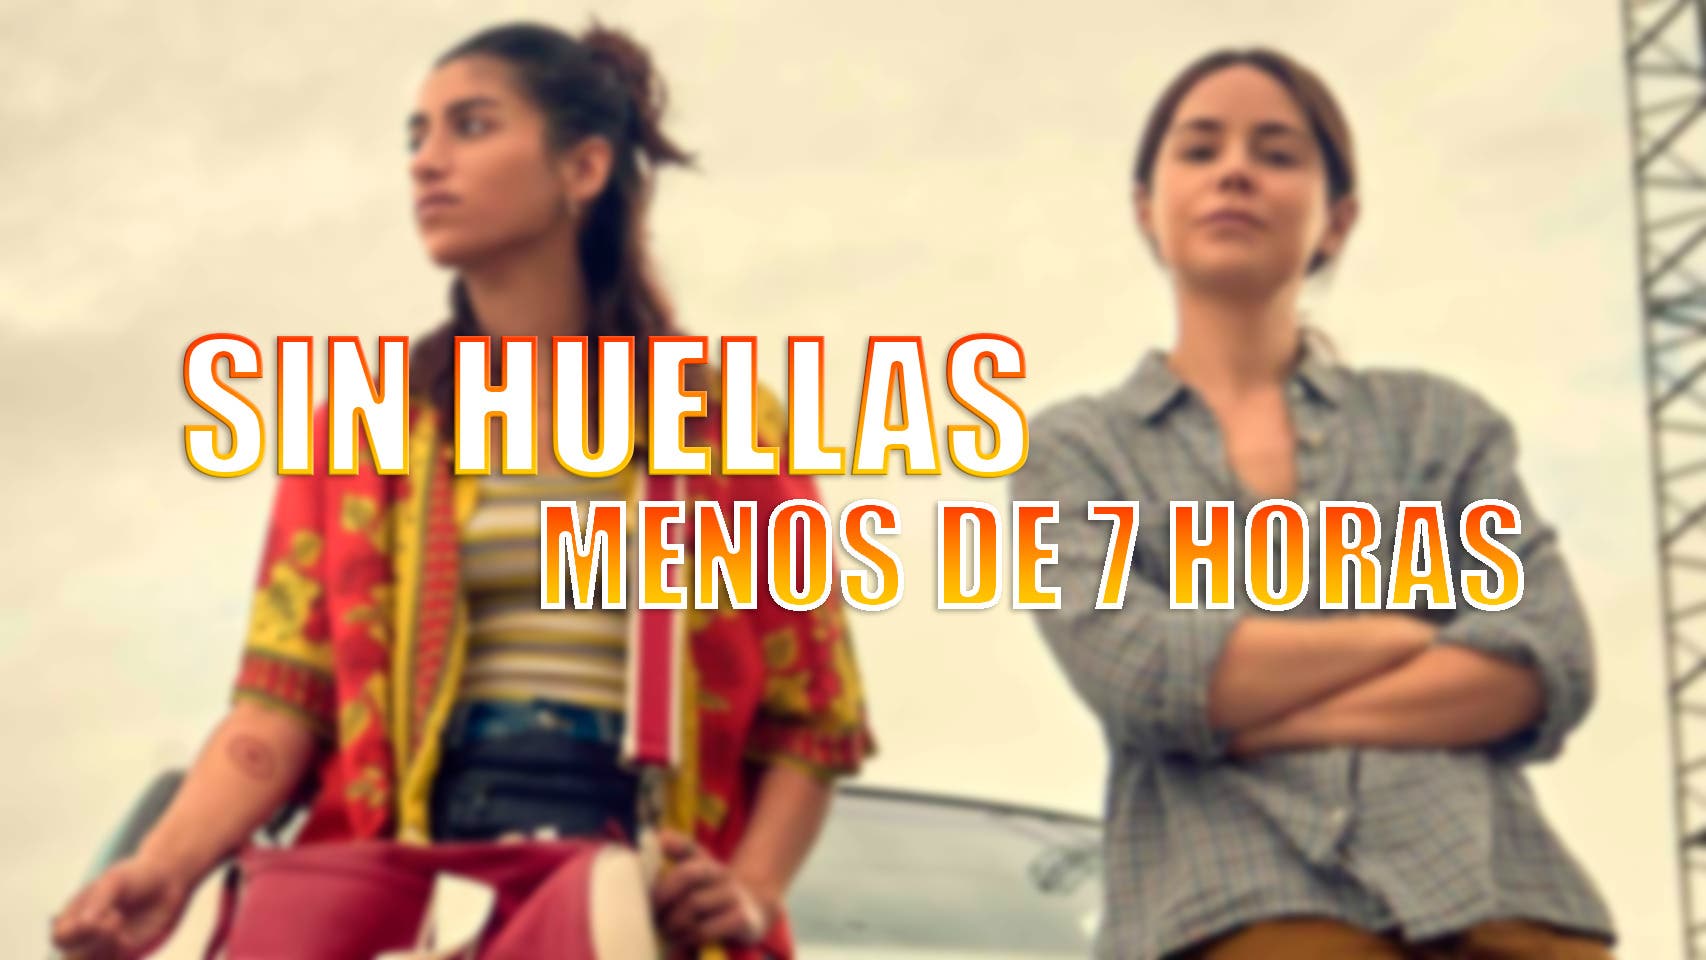 Sin huellas lasts less than 7 hours and is one of the most successful Spanish series on Prime Video